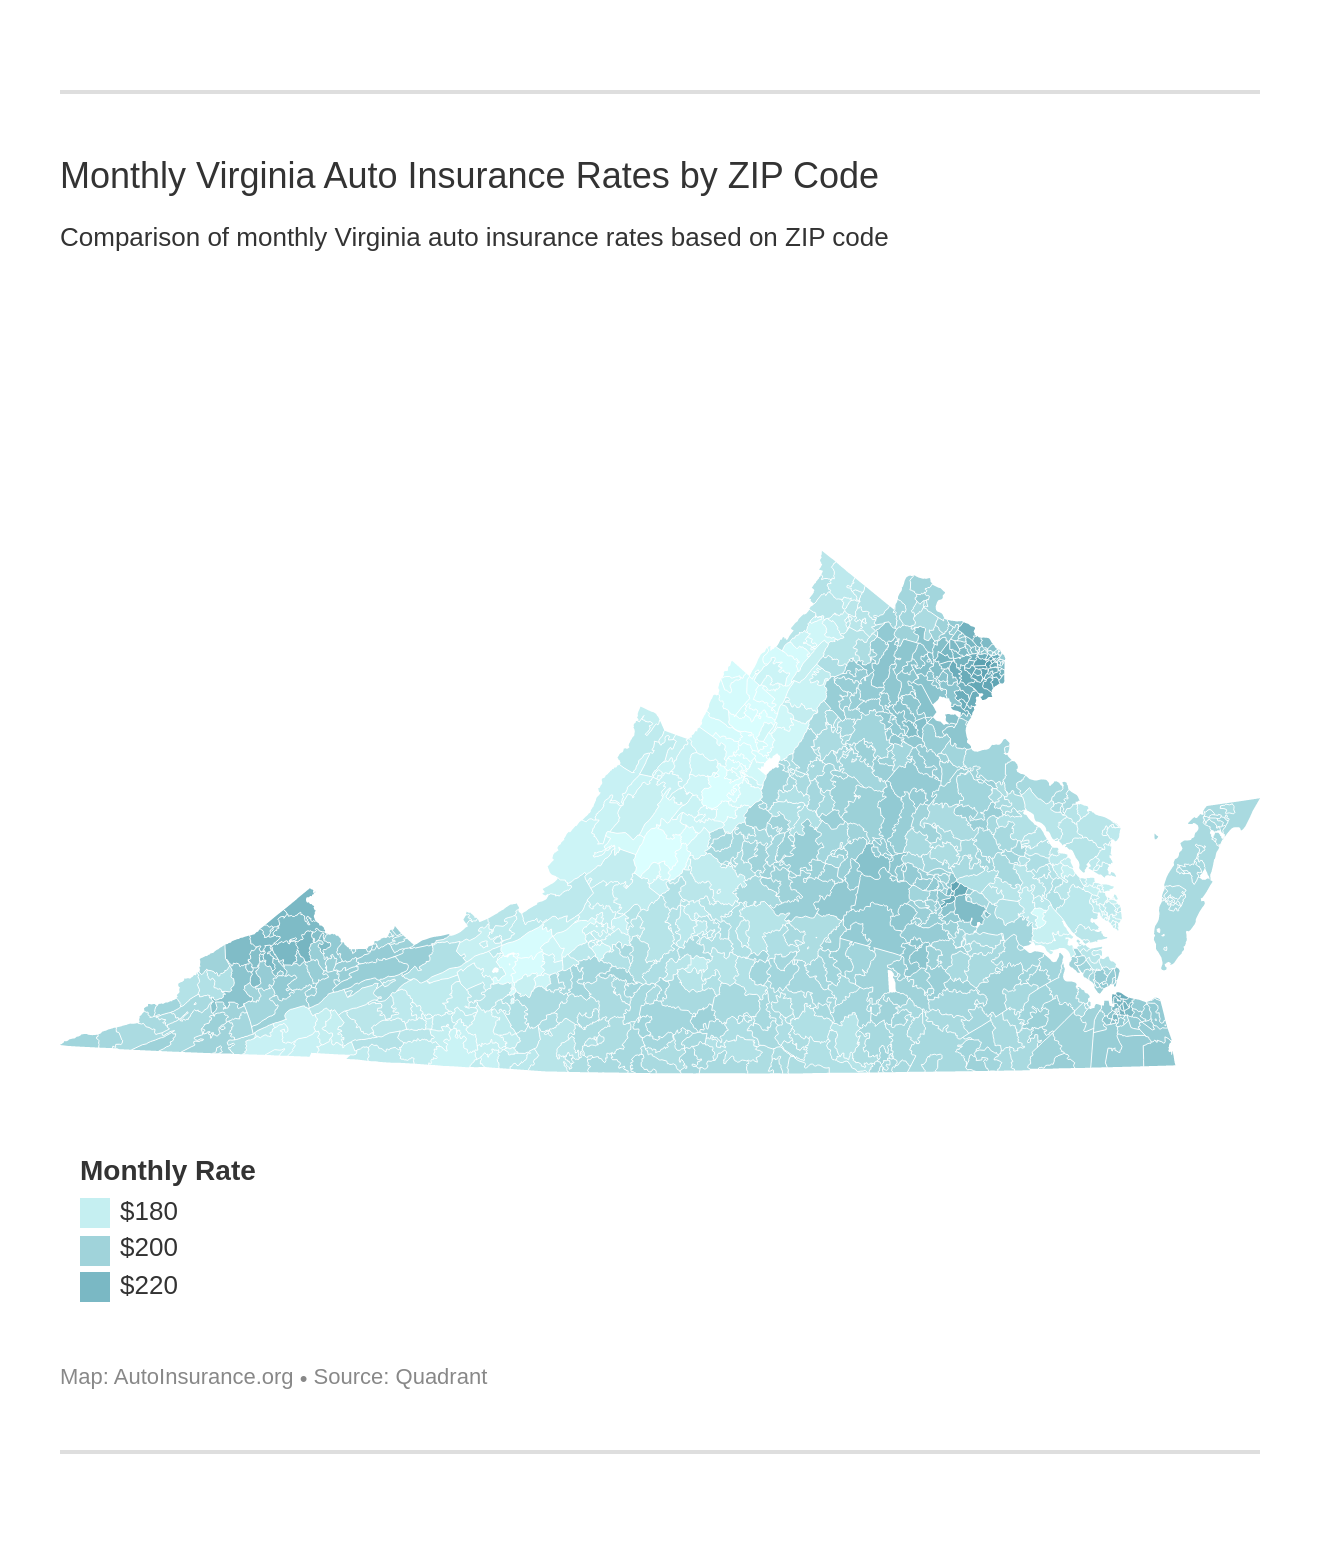 Monthly Virginia Auto Insurance Rates by ZIP Code